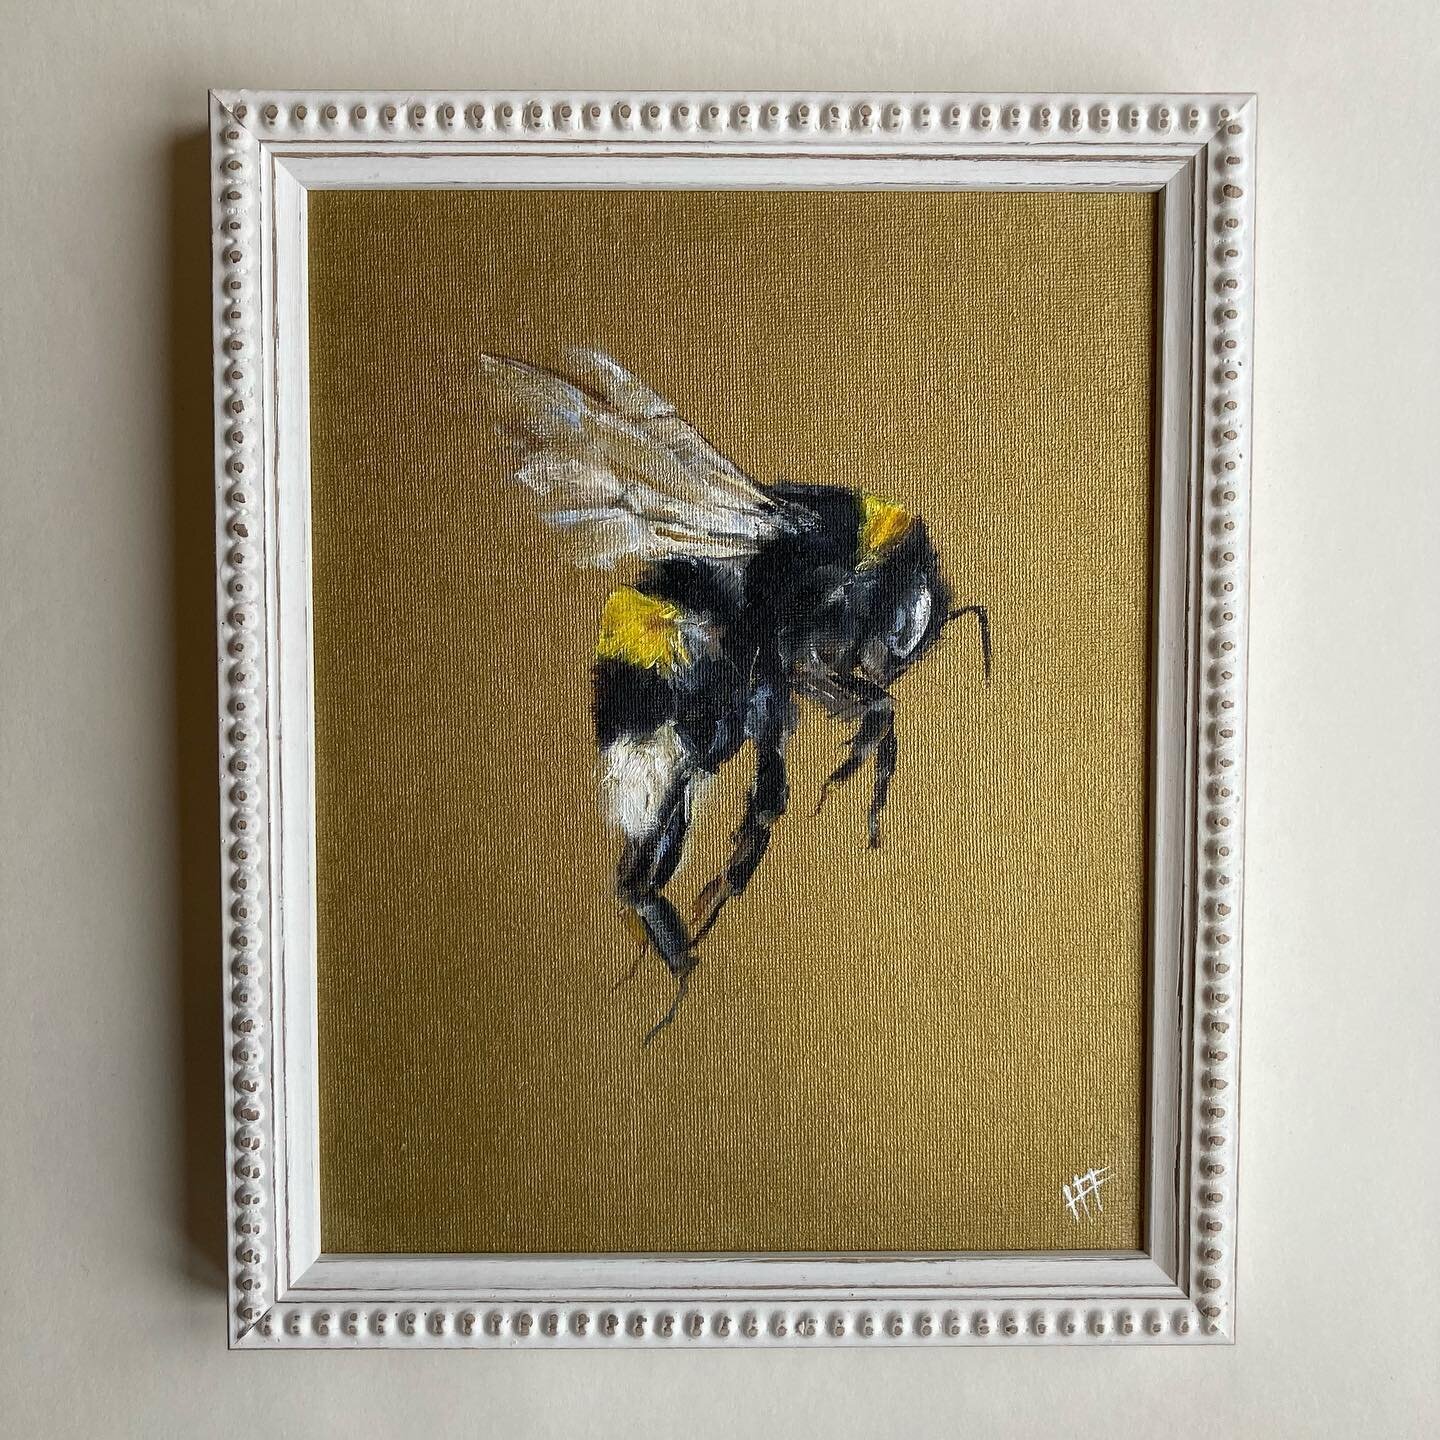 Christmas pressie inspo! This stock piece would make a very special present for a bee lover 🐝 

&lsquo;Incoming!&rsquo; is an oil and acrylic on antique gold, beautifully framed by @levertonframers 💫 

Full details are on the originals shop page of